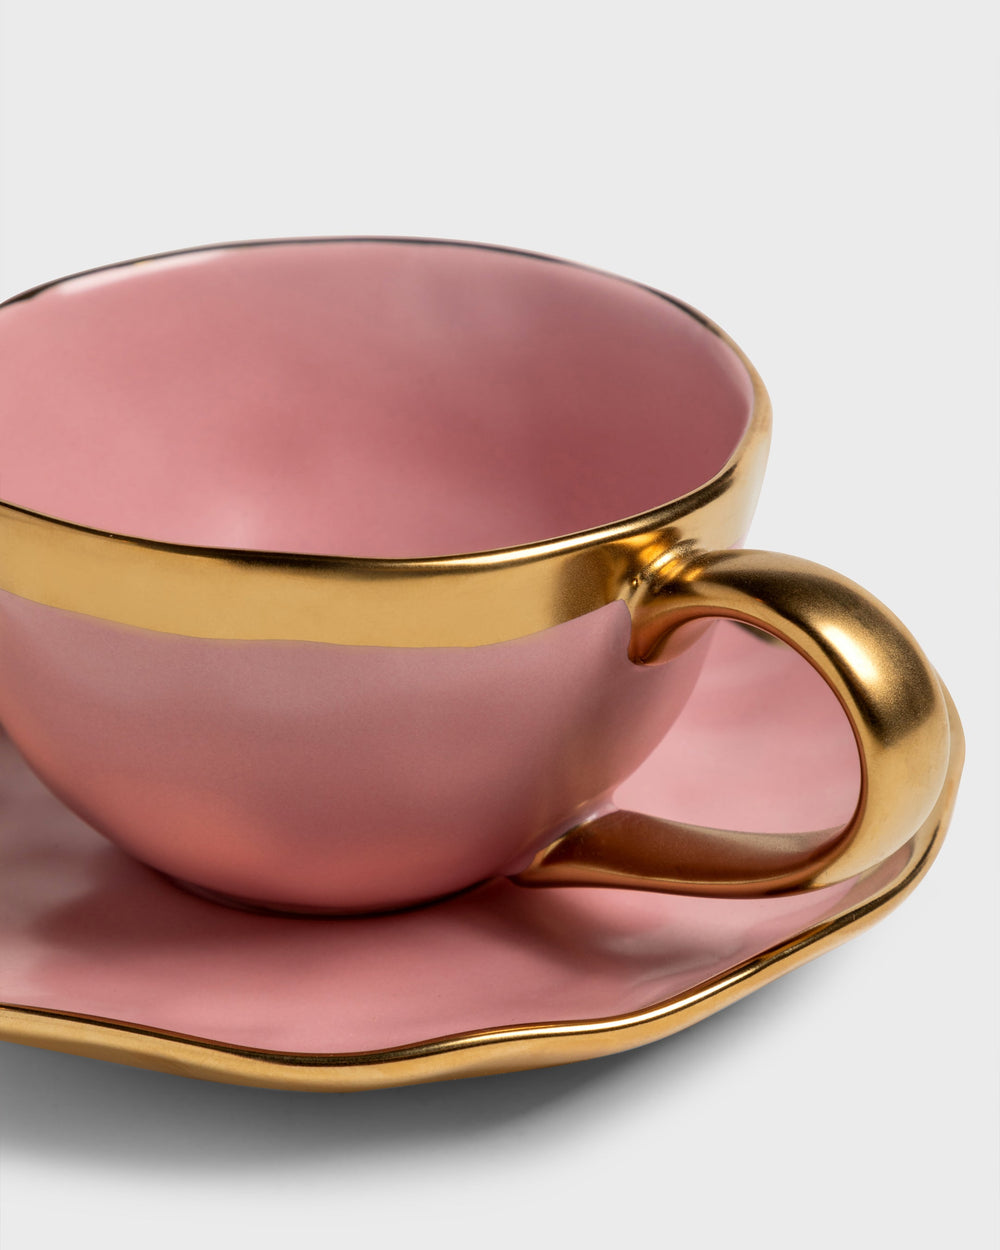 Tania Bulhoes Tea Cup and Saucer Mediterraneo Pink